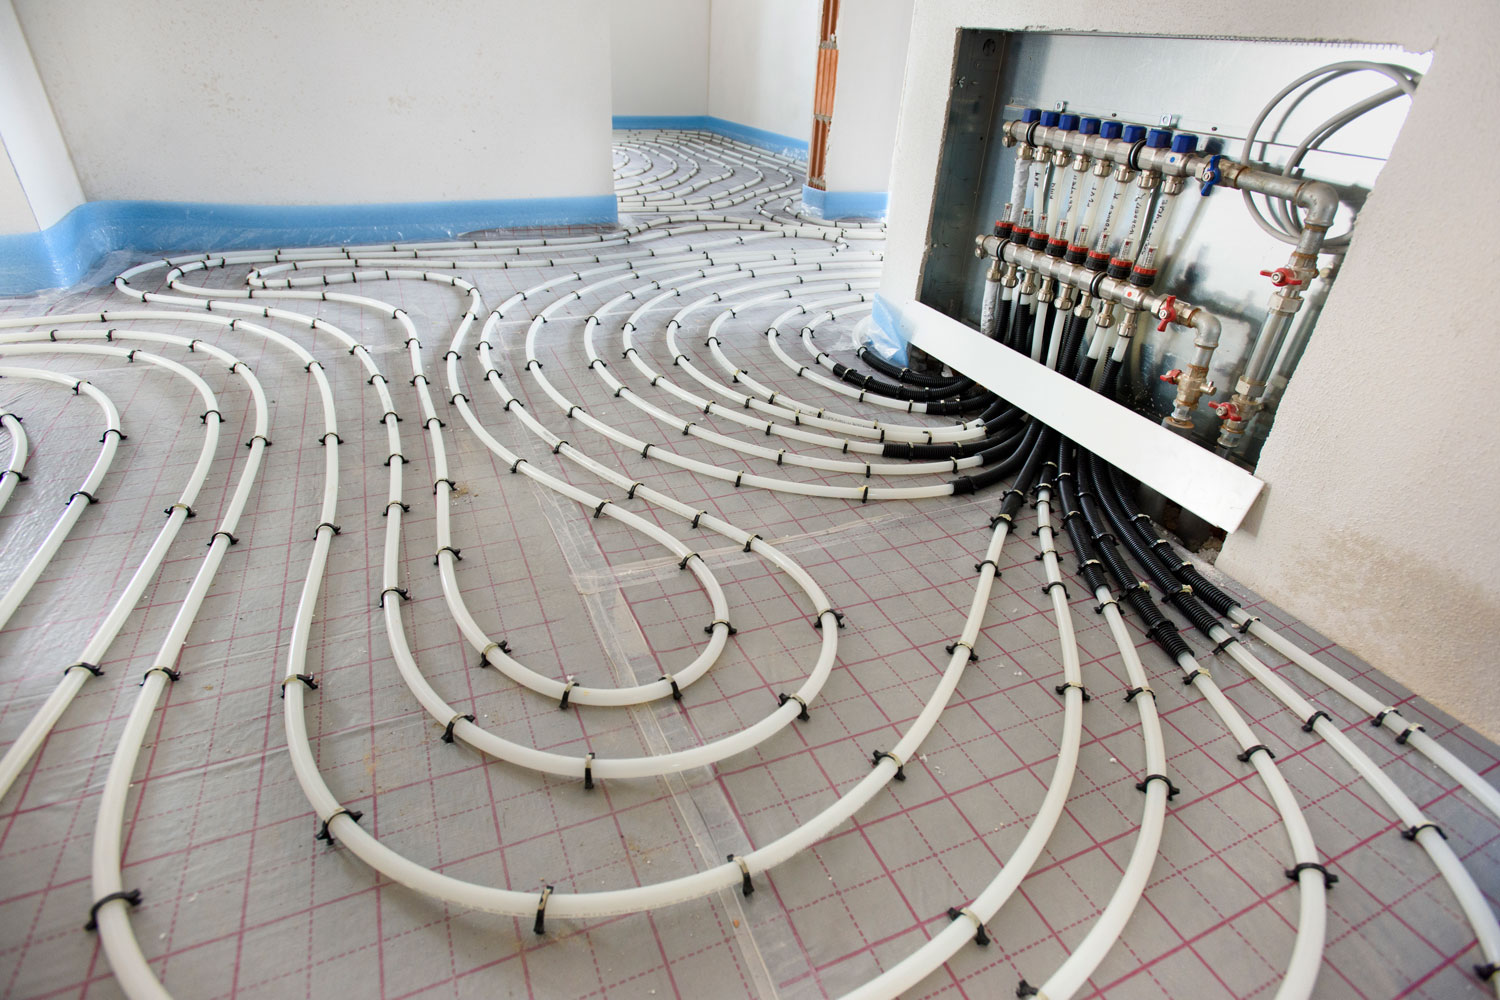 A floor heating system for the living room